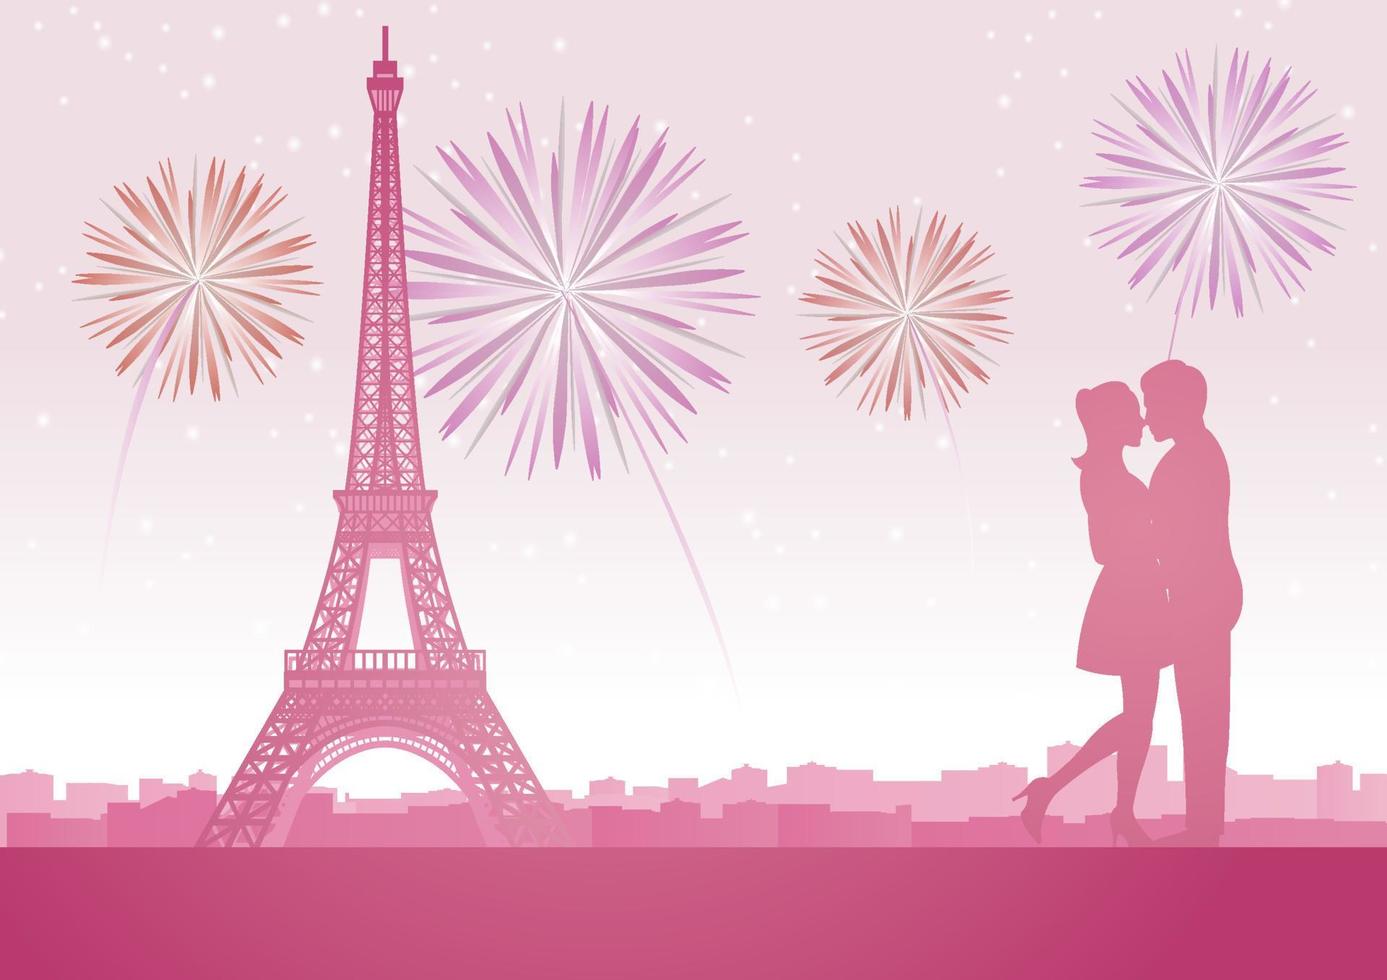 couple hug together around with skyscraper near Eiffel tower in Paris at celebration night,silhouette style vector